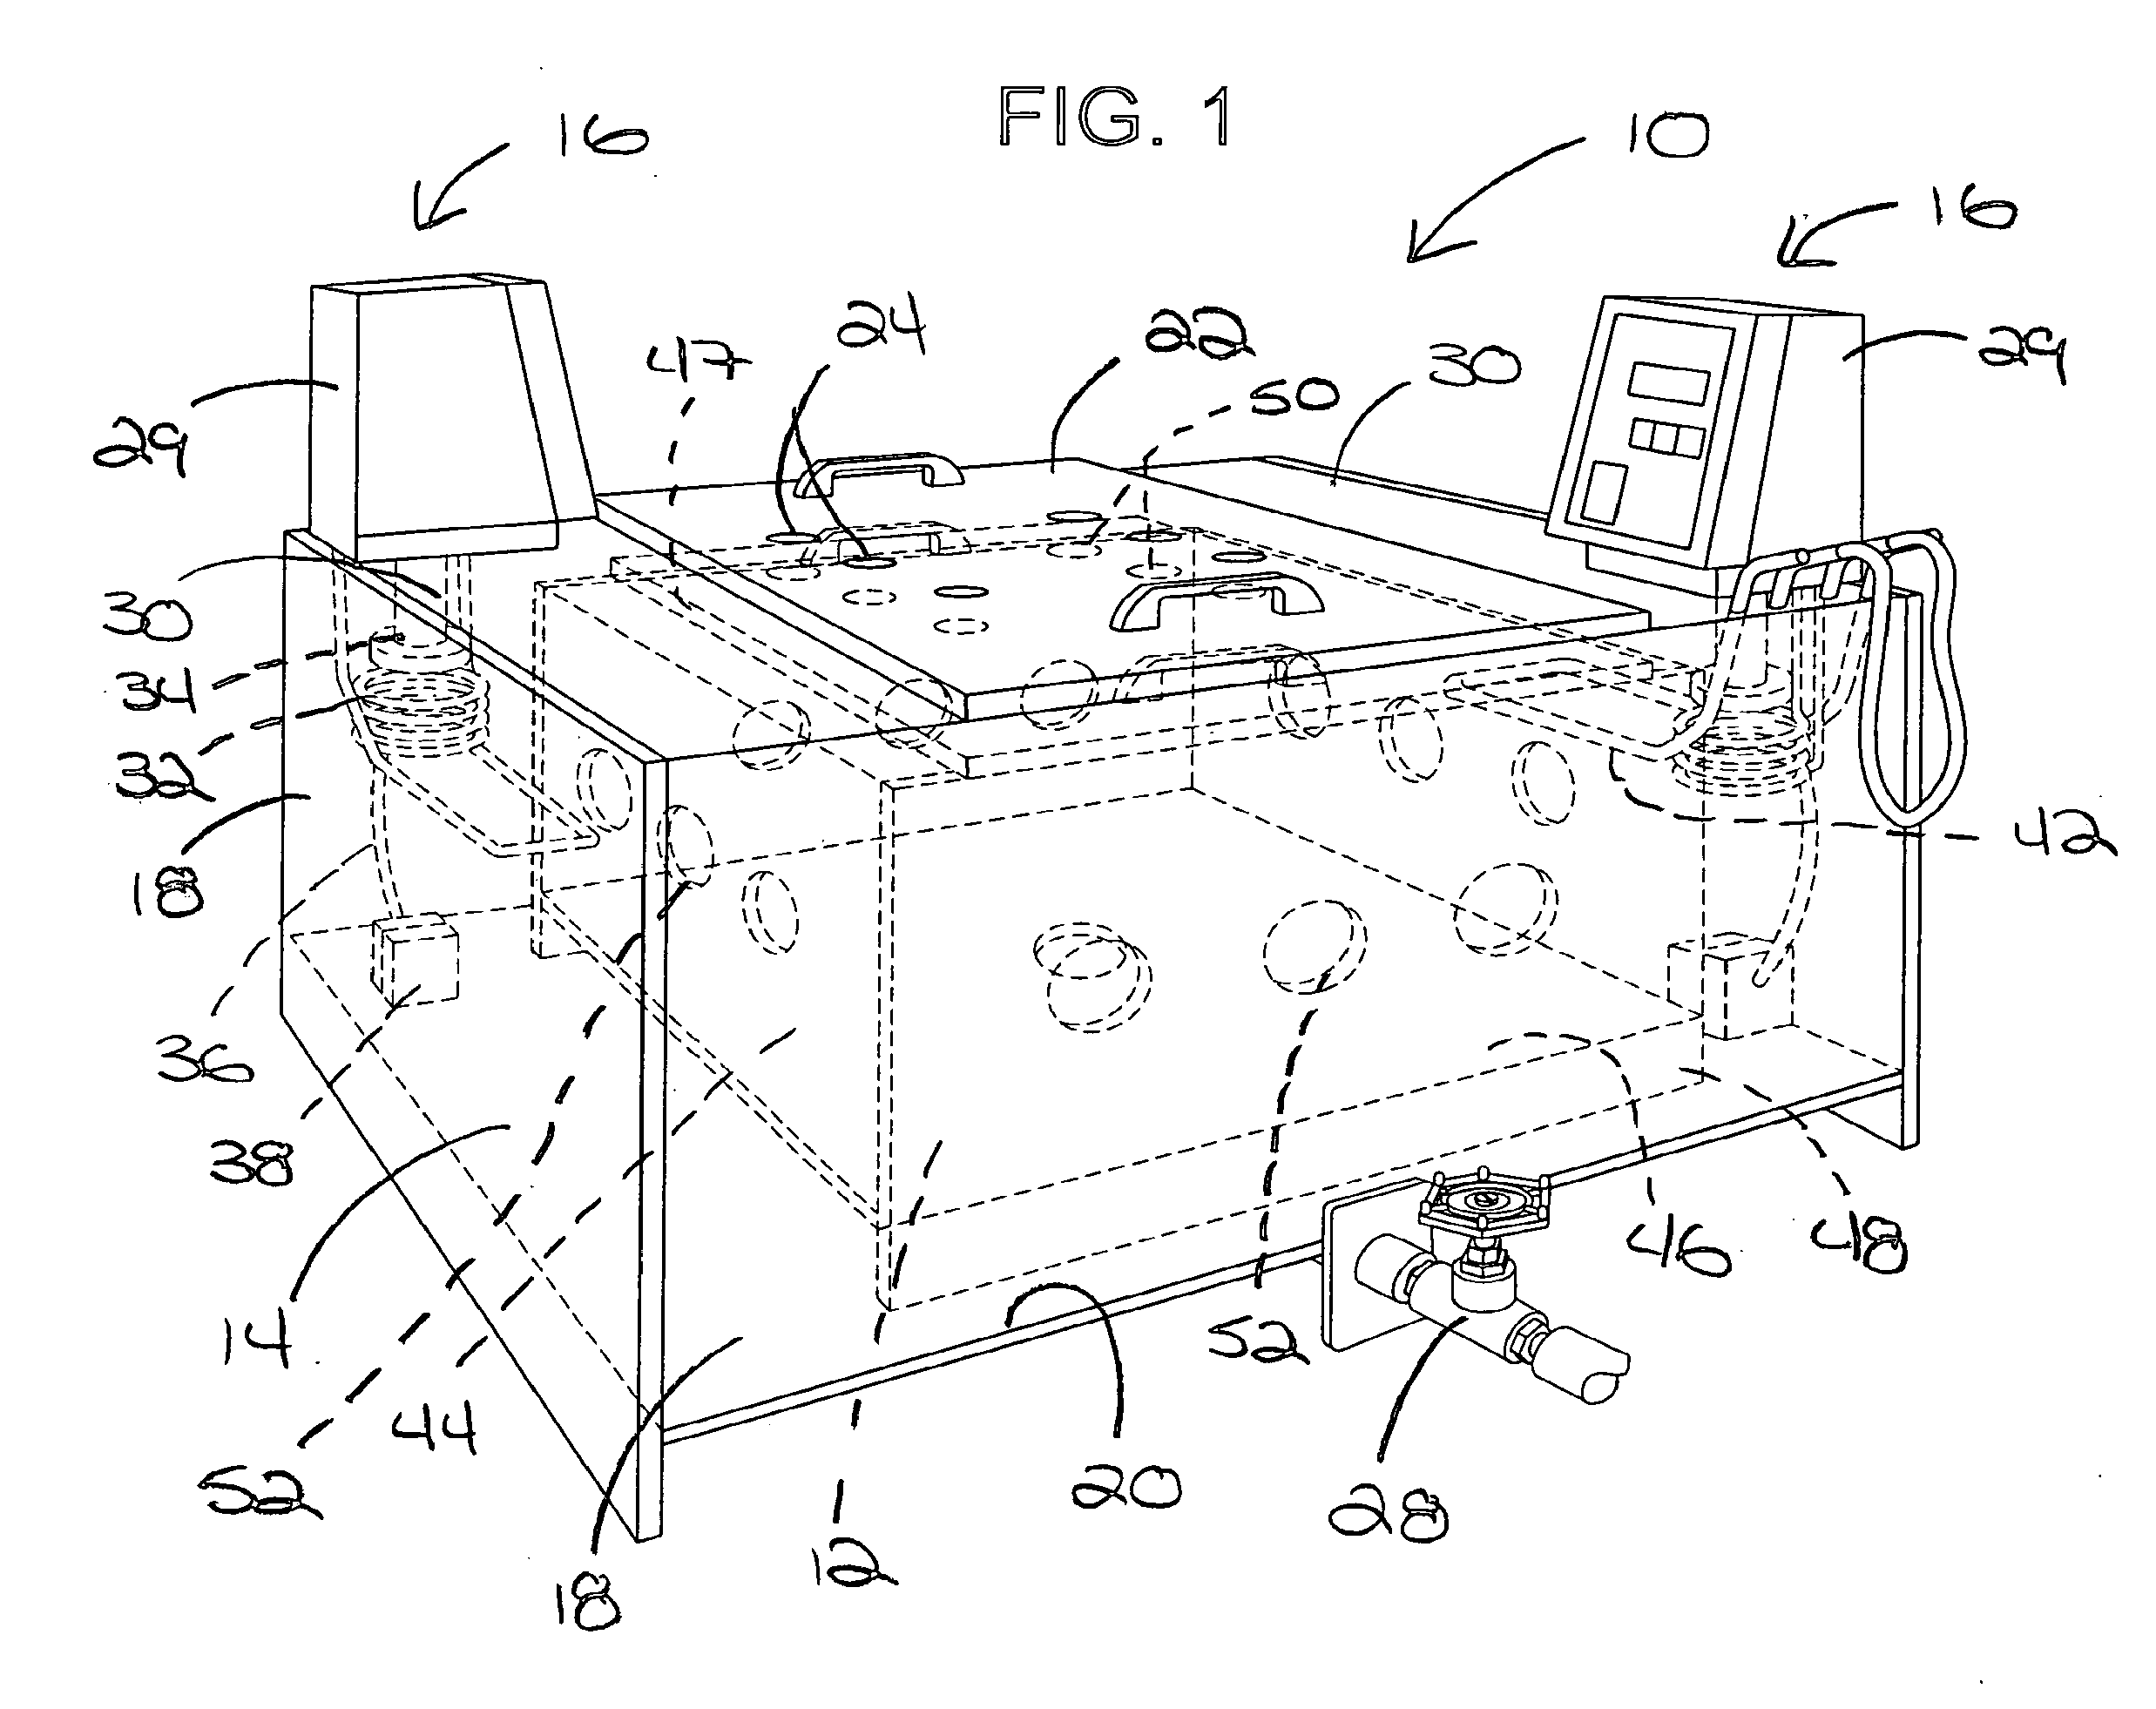 Apparatus for producing a biomimetic coating on a medical implant